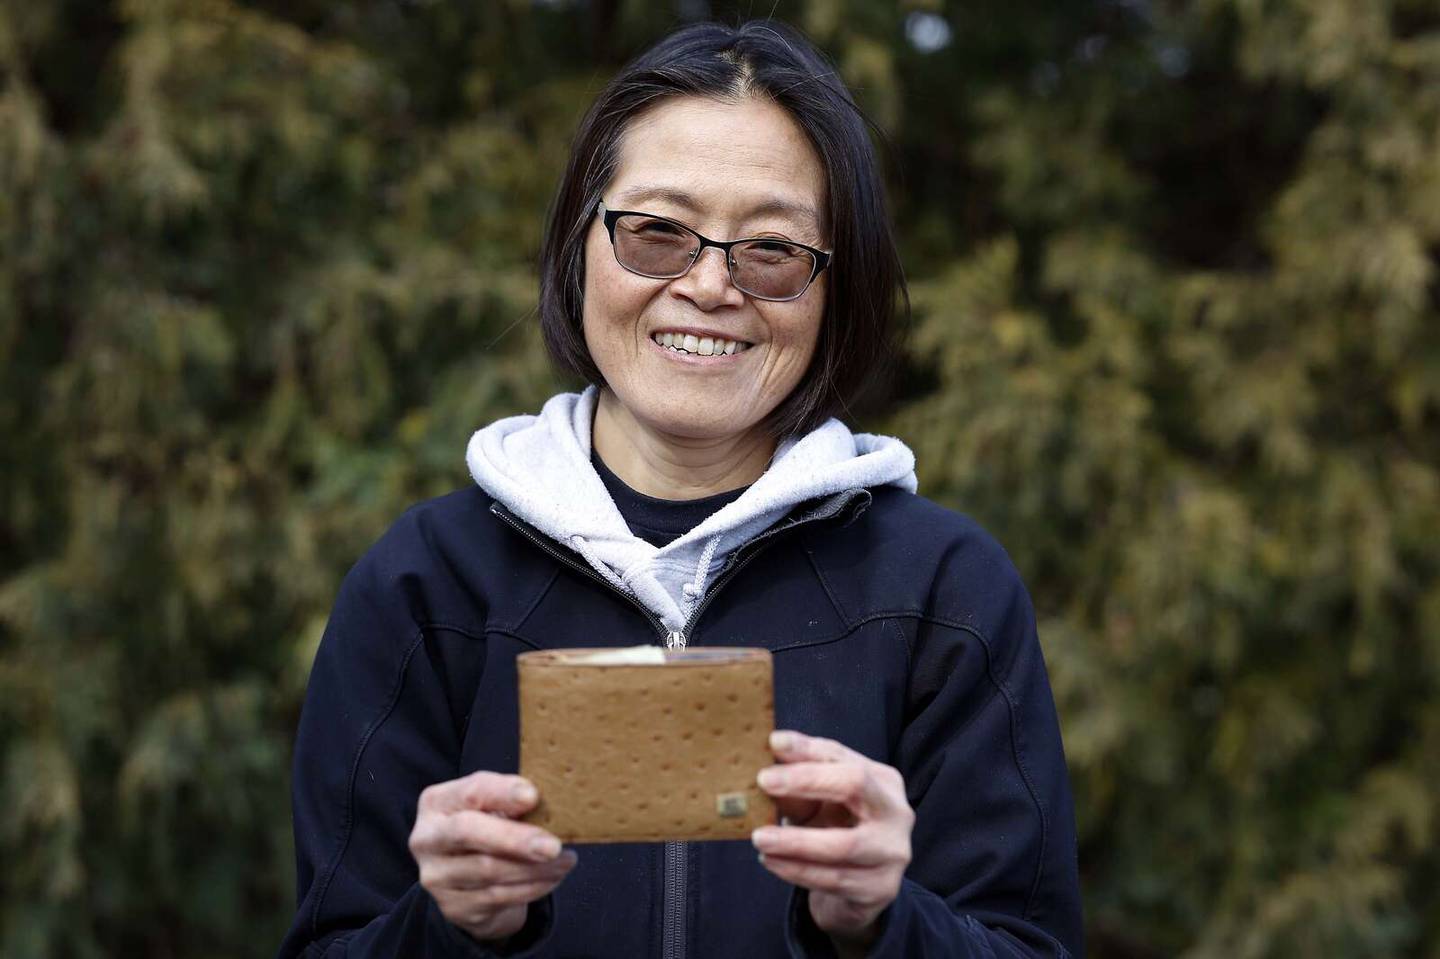 Julia Hsia holds a replacement wallet that her mother gave her. Hsia lost her wallet in a river in Arizona during a trip in 1995. A man recently found the missing wallet.